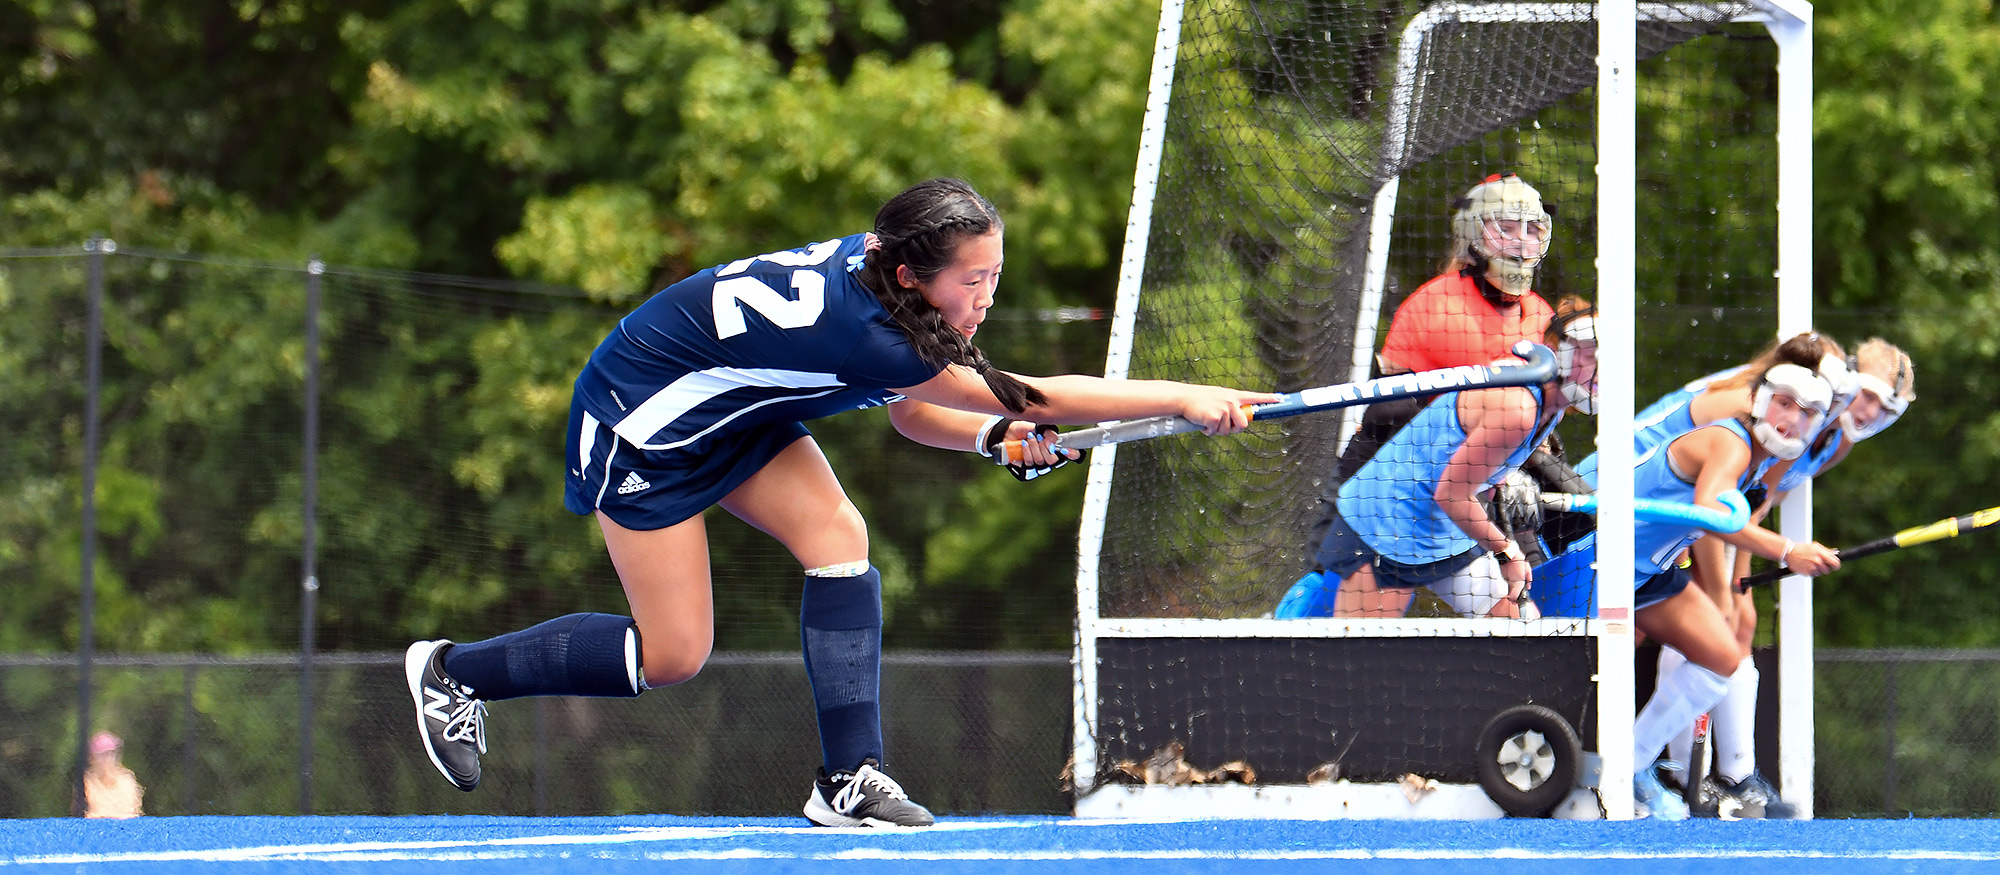 Anna Induni scored her team-high ninth goal of the season in Mount Holyoke's 2-1 win at Wheaton College on Oct. 29, 2022. (RJB Sports file photo)